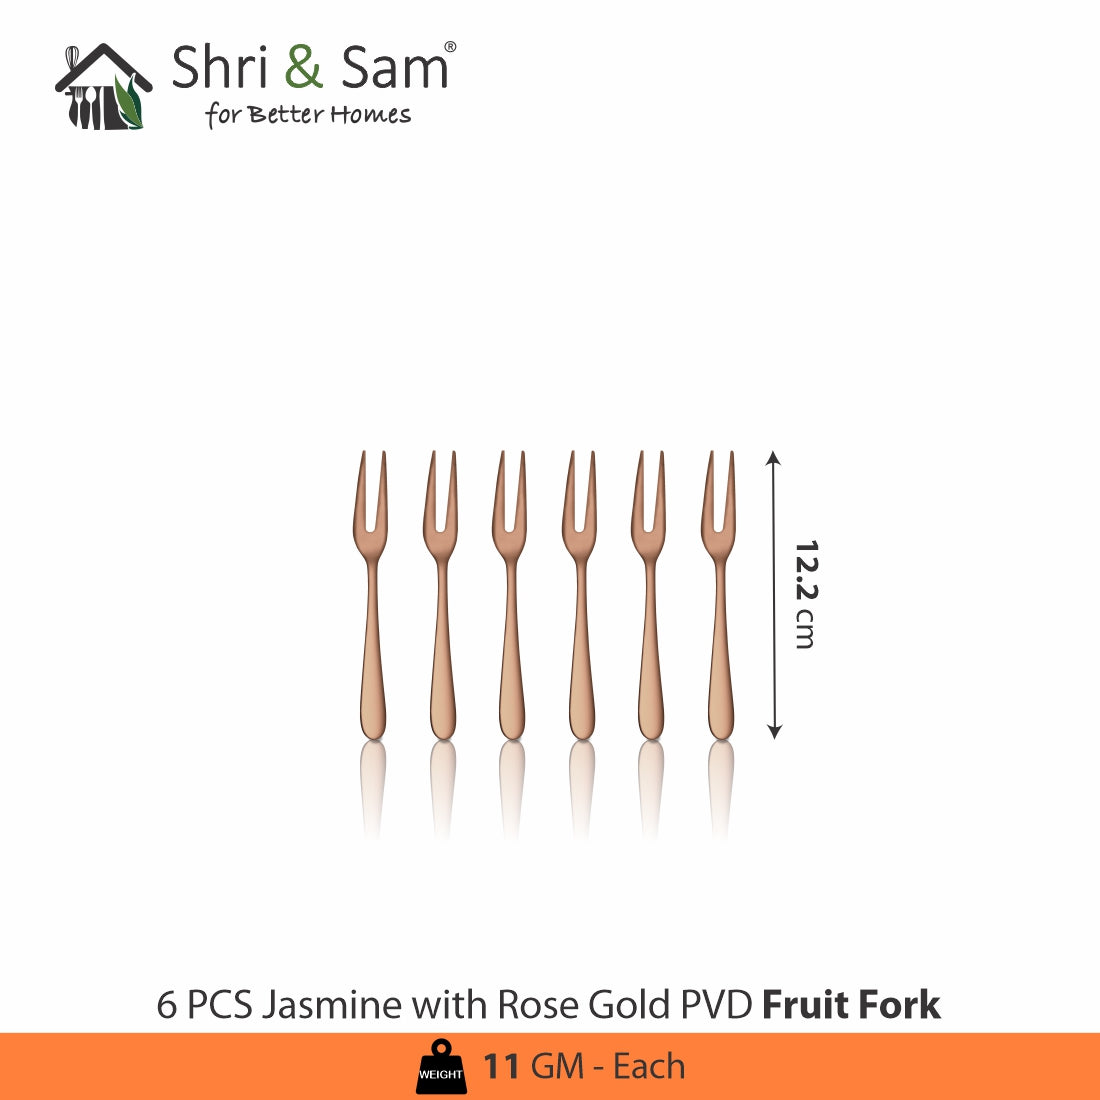 Stainless Steel Cutlery with Rose Gold PVD Coating Jasmine